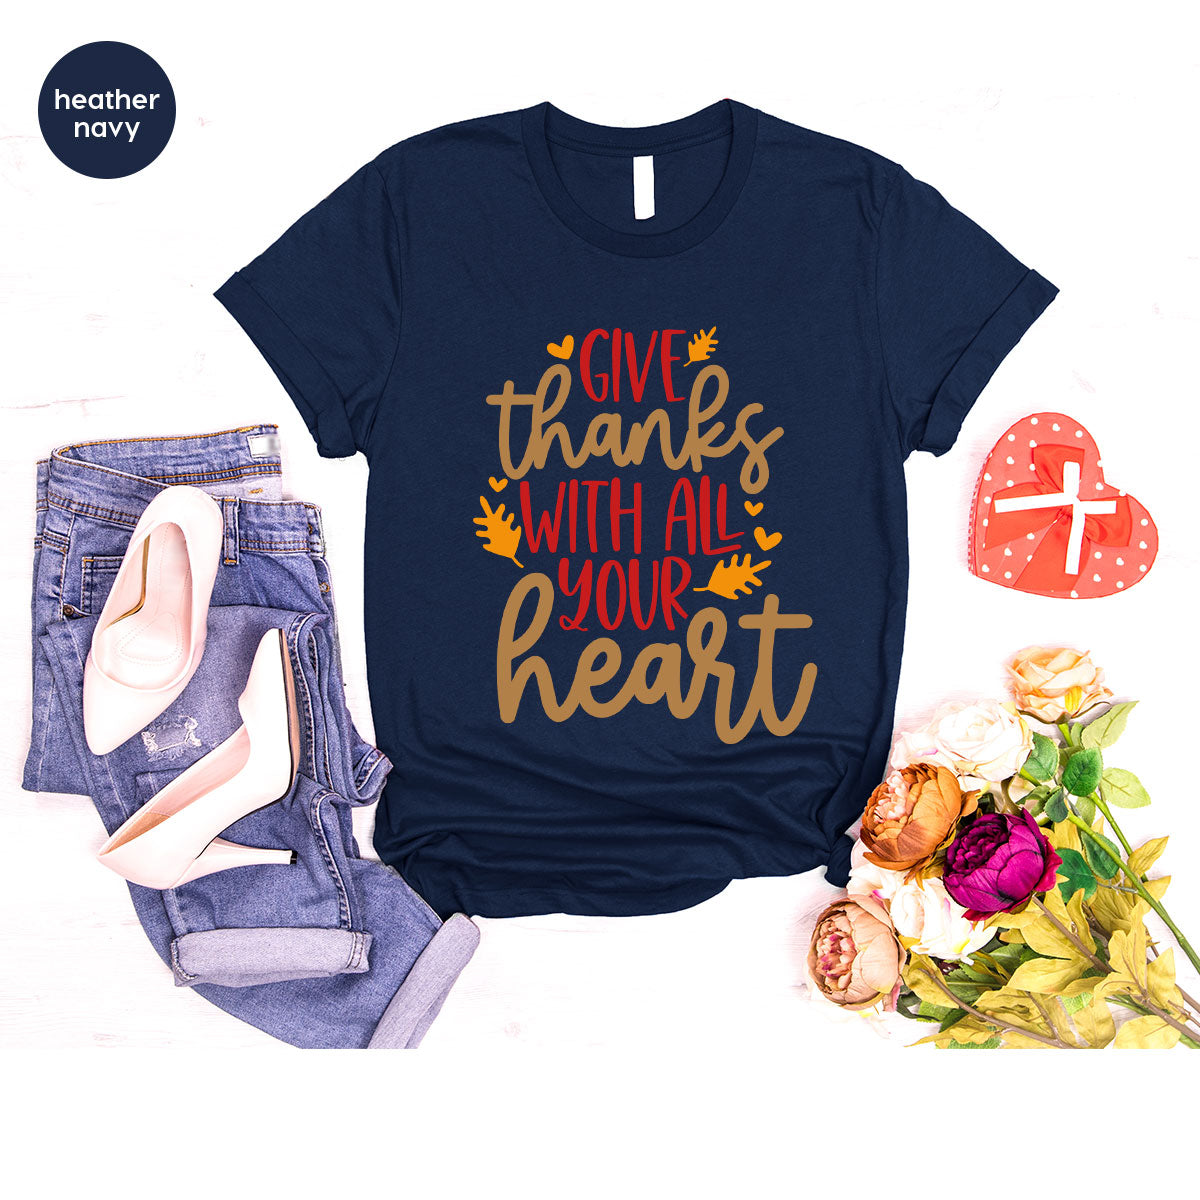 Cute Fall Clothing, Thanksgiving T-Shirt, Gift for Her, Leaves Graphic Tees, Autumn Outfit, Womens Vneck Shirt, Thankful Sweatshirt